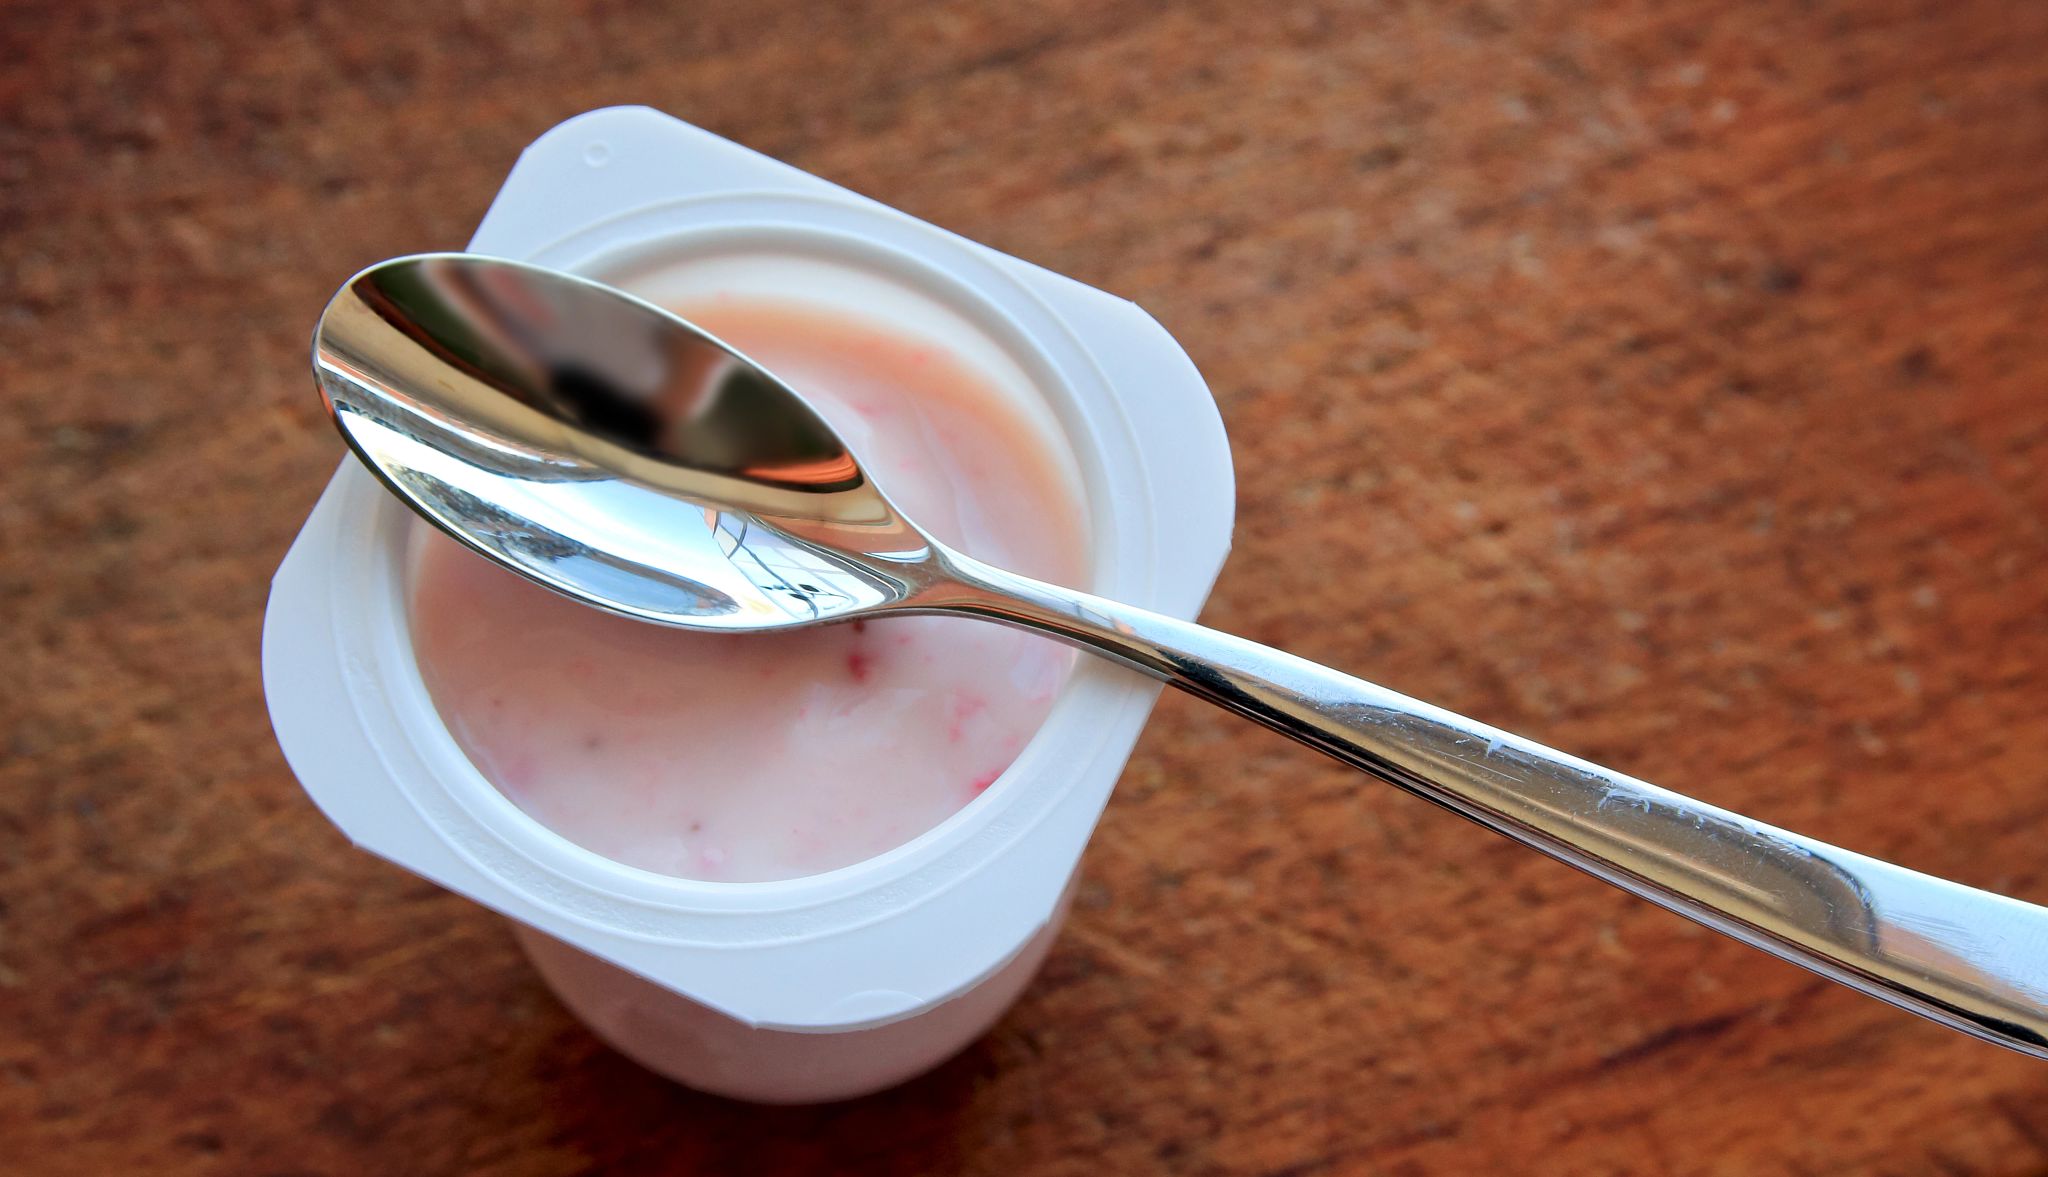 Strawberry pink yogurt in white plastic cup on a wooden rustic background with spoon on it.